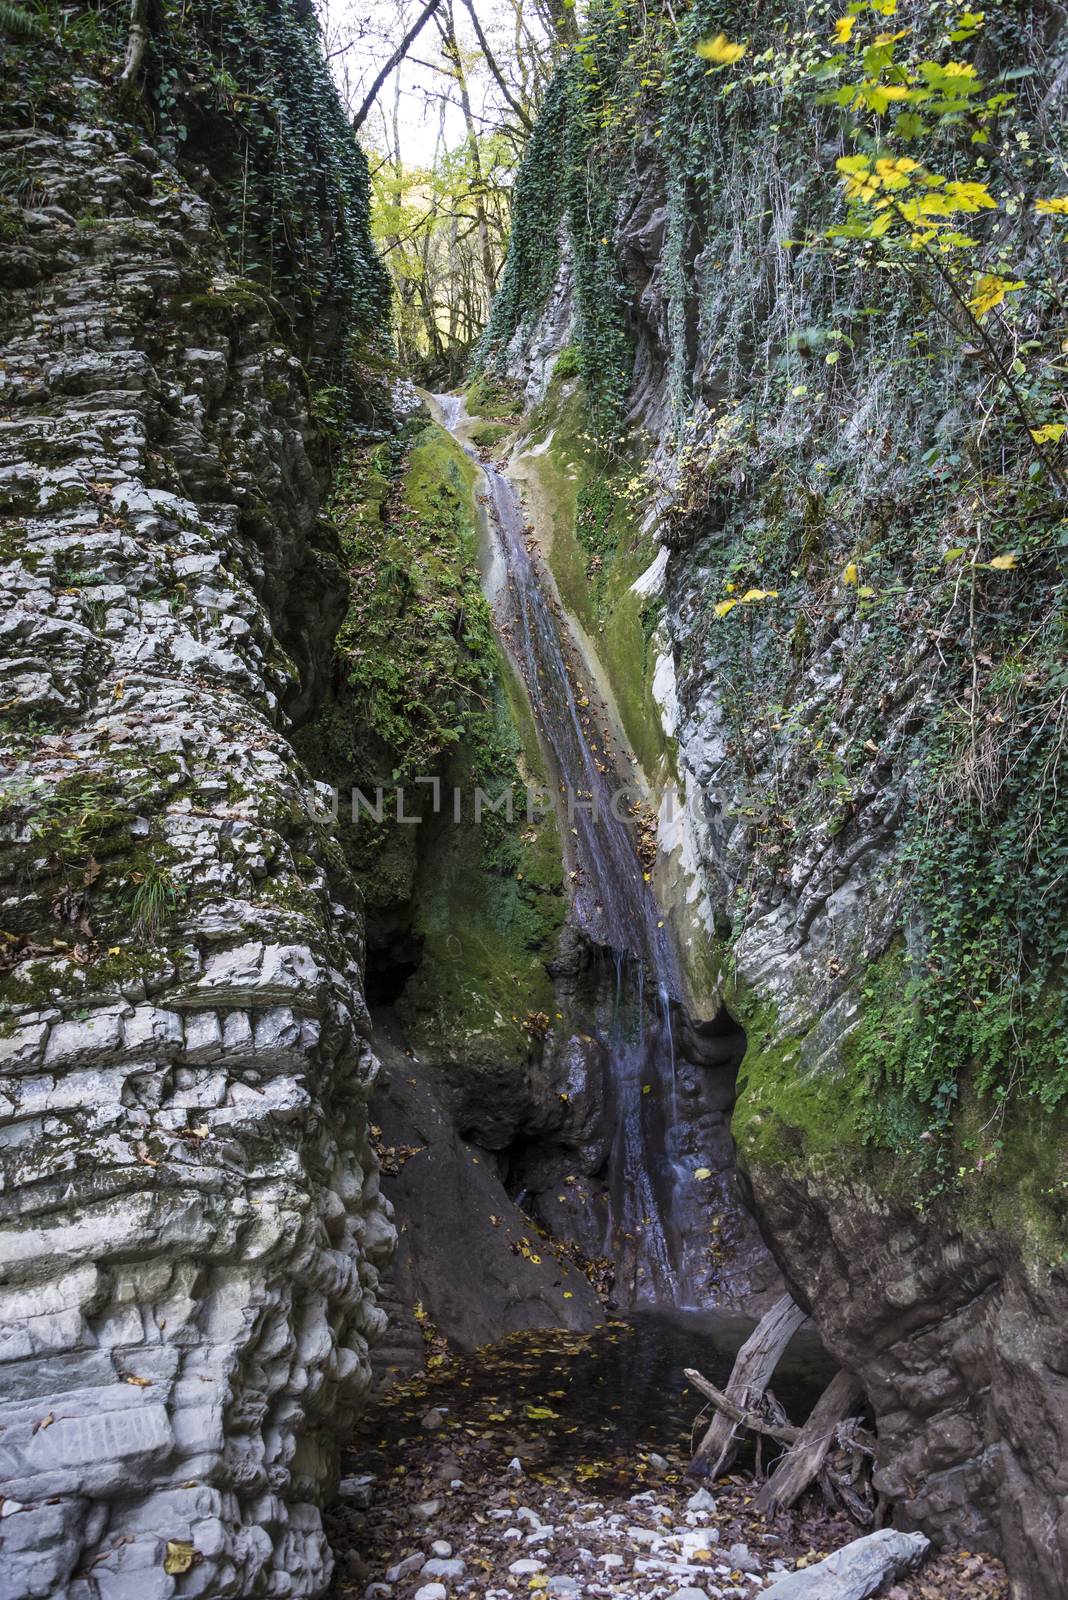 Waterfall Miracle beauty in Lazarevsky district of Sochi, Russia. 7 November 2019.